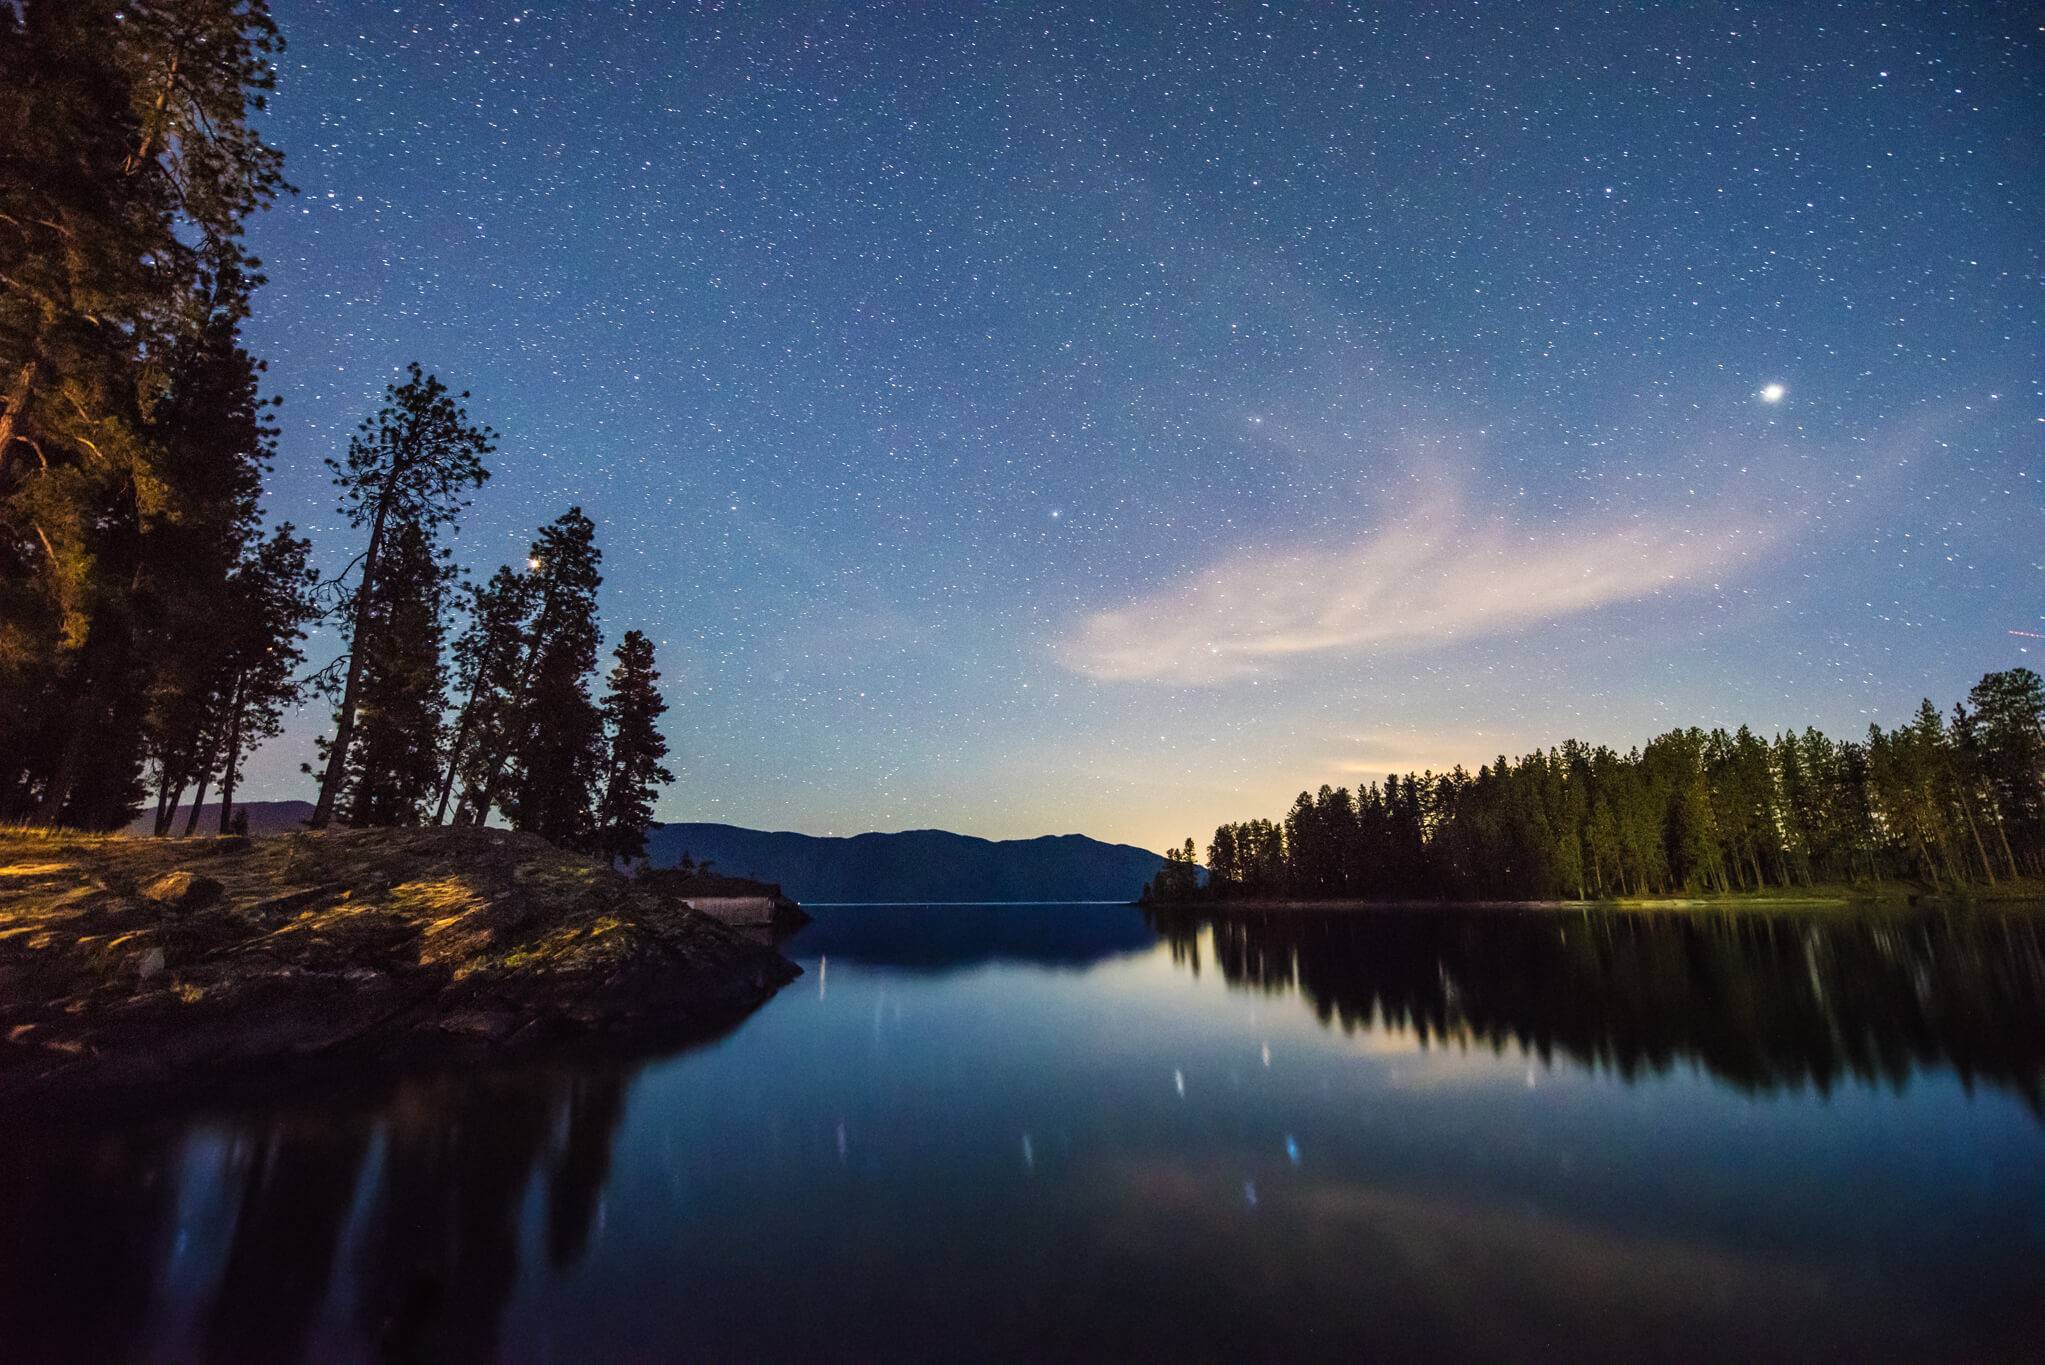 Night sky with galaxies and stars over Lake Pend Oreille.